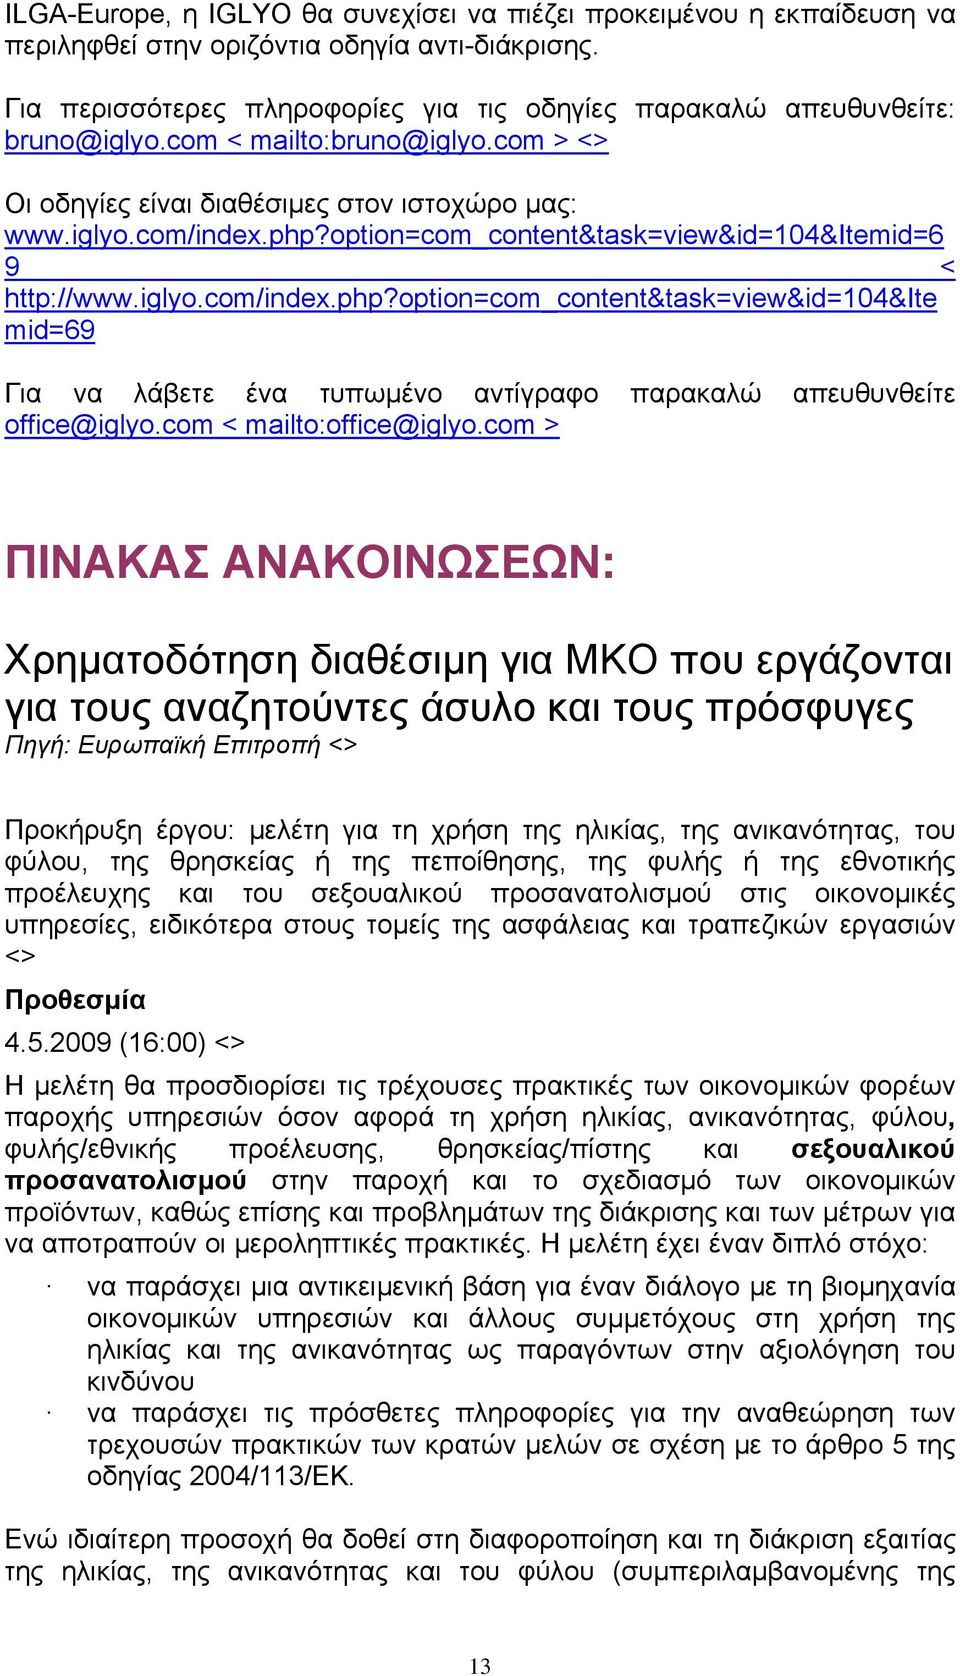 option=com_content&task=view&id=104&itemid=6 9 < http://www.iglyo.com/index.php?option=com_content&task=view&id=104&ite mid=69 Για να λάβετε ένα τυπωμένο αντίγραφο παρακαλώ απευθυνθείτε office@iglyo.